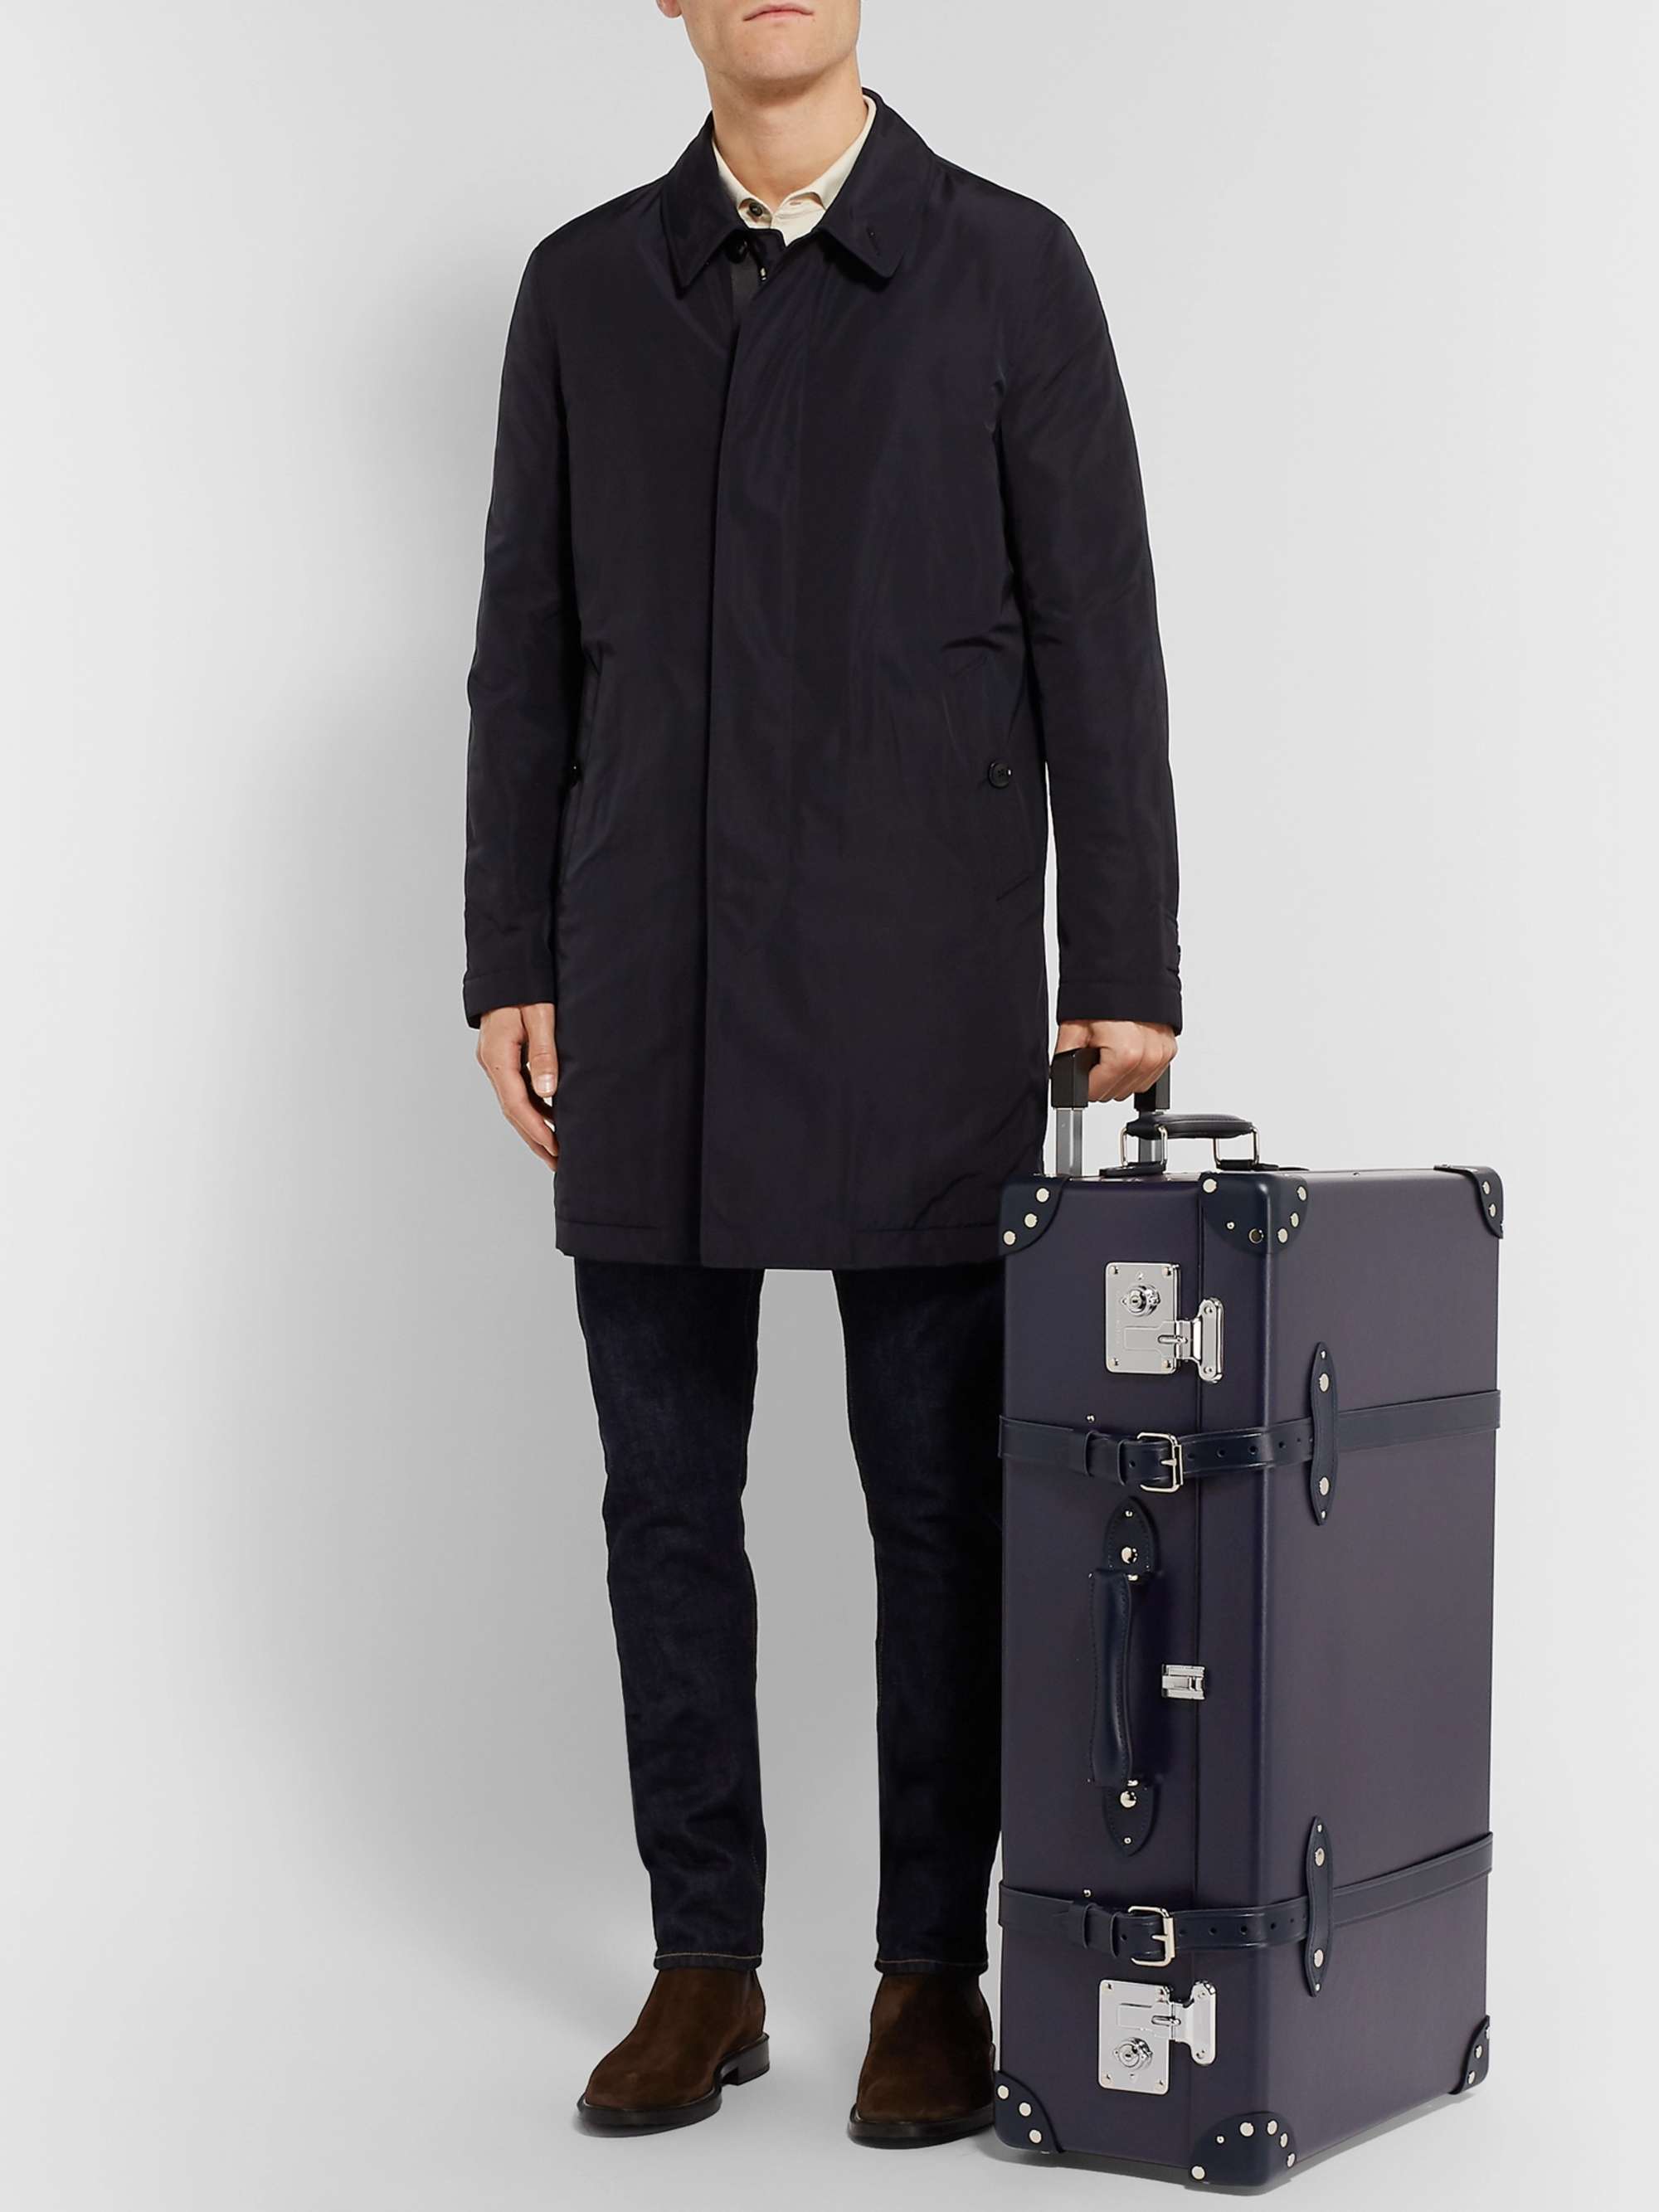 GLOBE-TROTTER 20"" Leather-Trimmed Carry-On Suitcase | MR PORTER